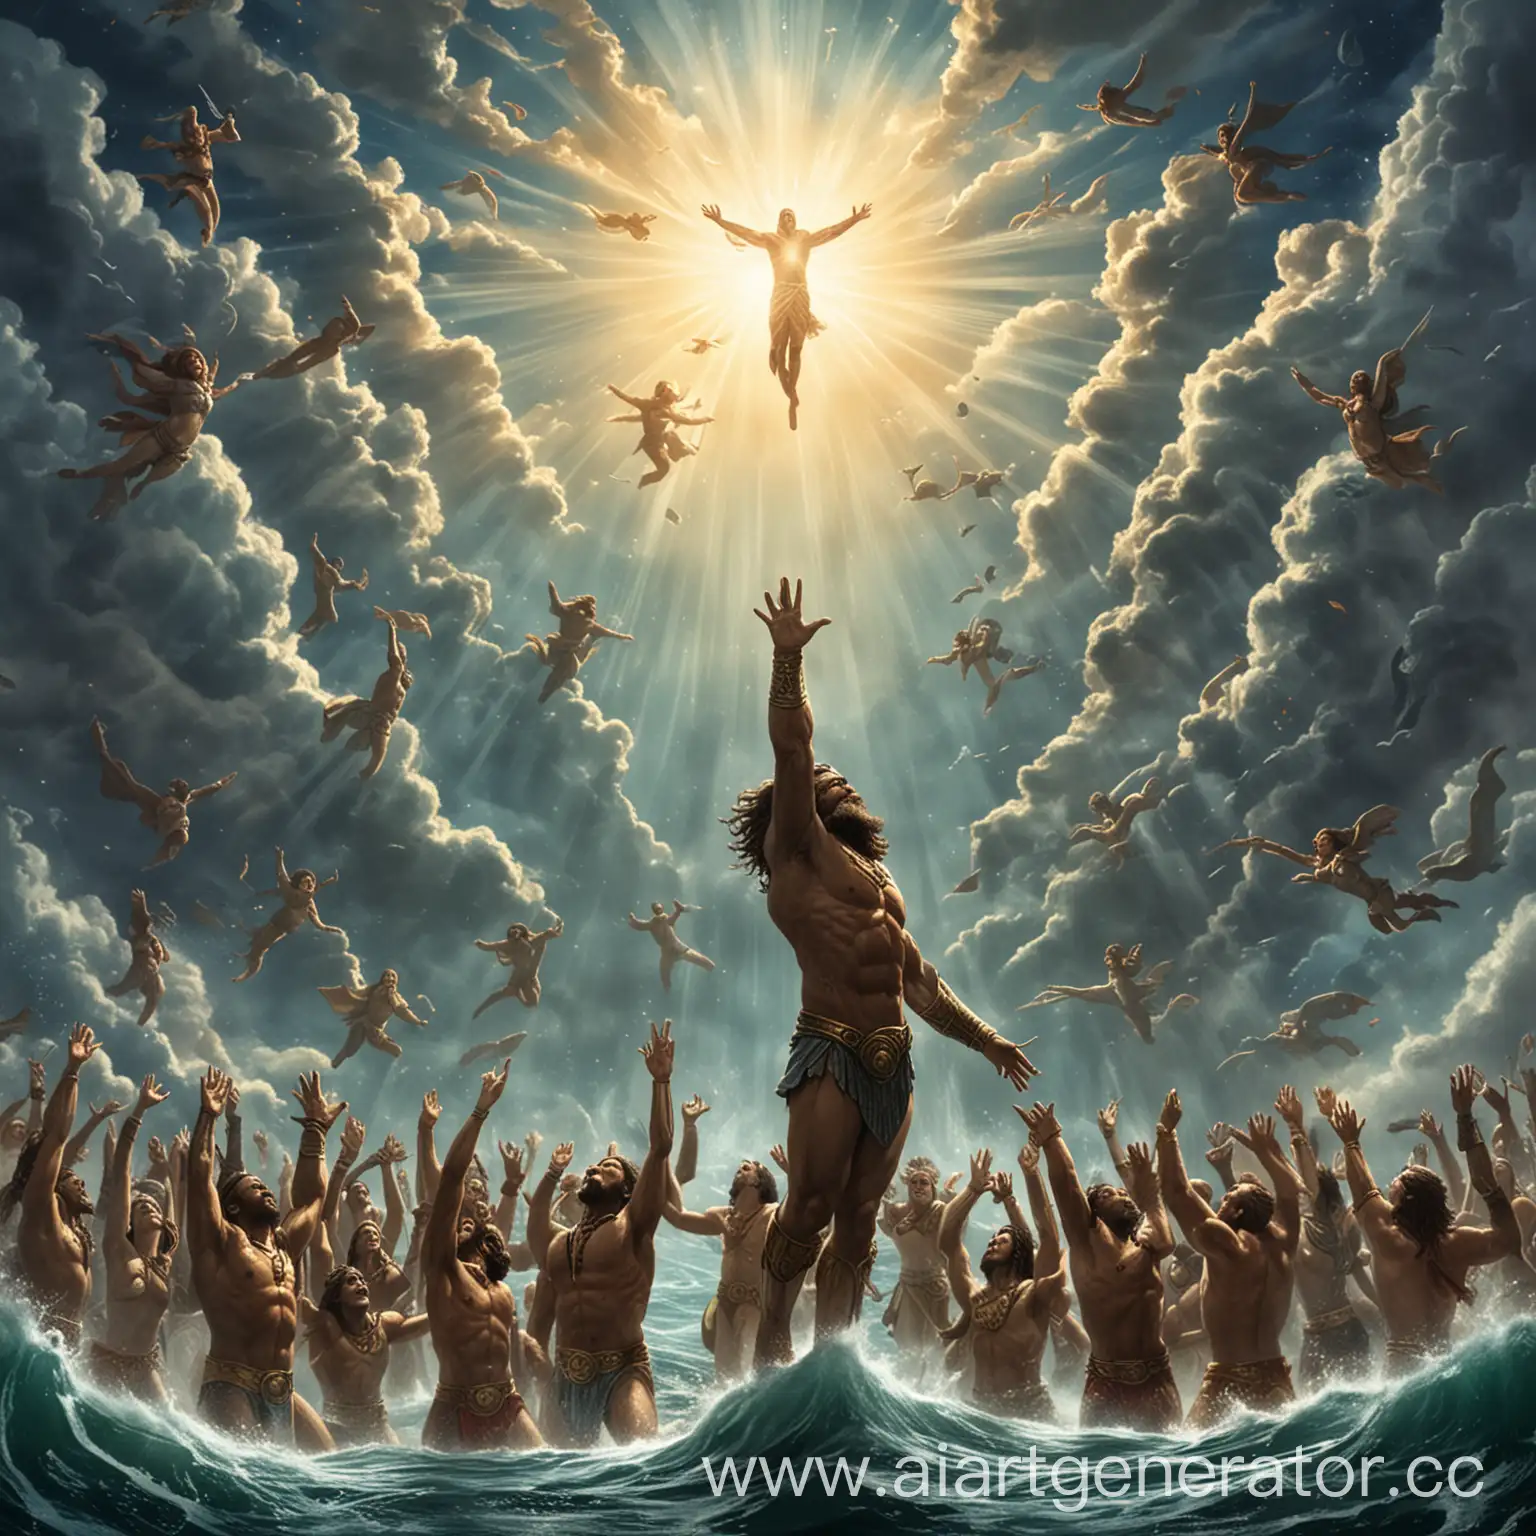 Atlanteans-Holding-Up-the-Sky-Mythical-beings-support-celestial-firmament